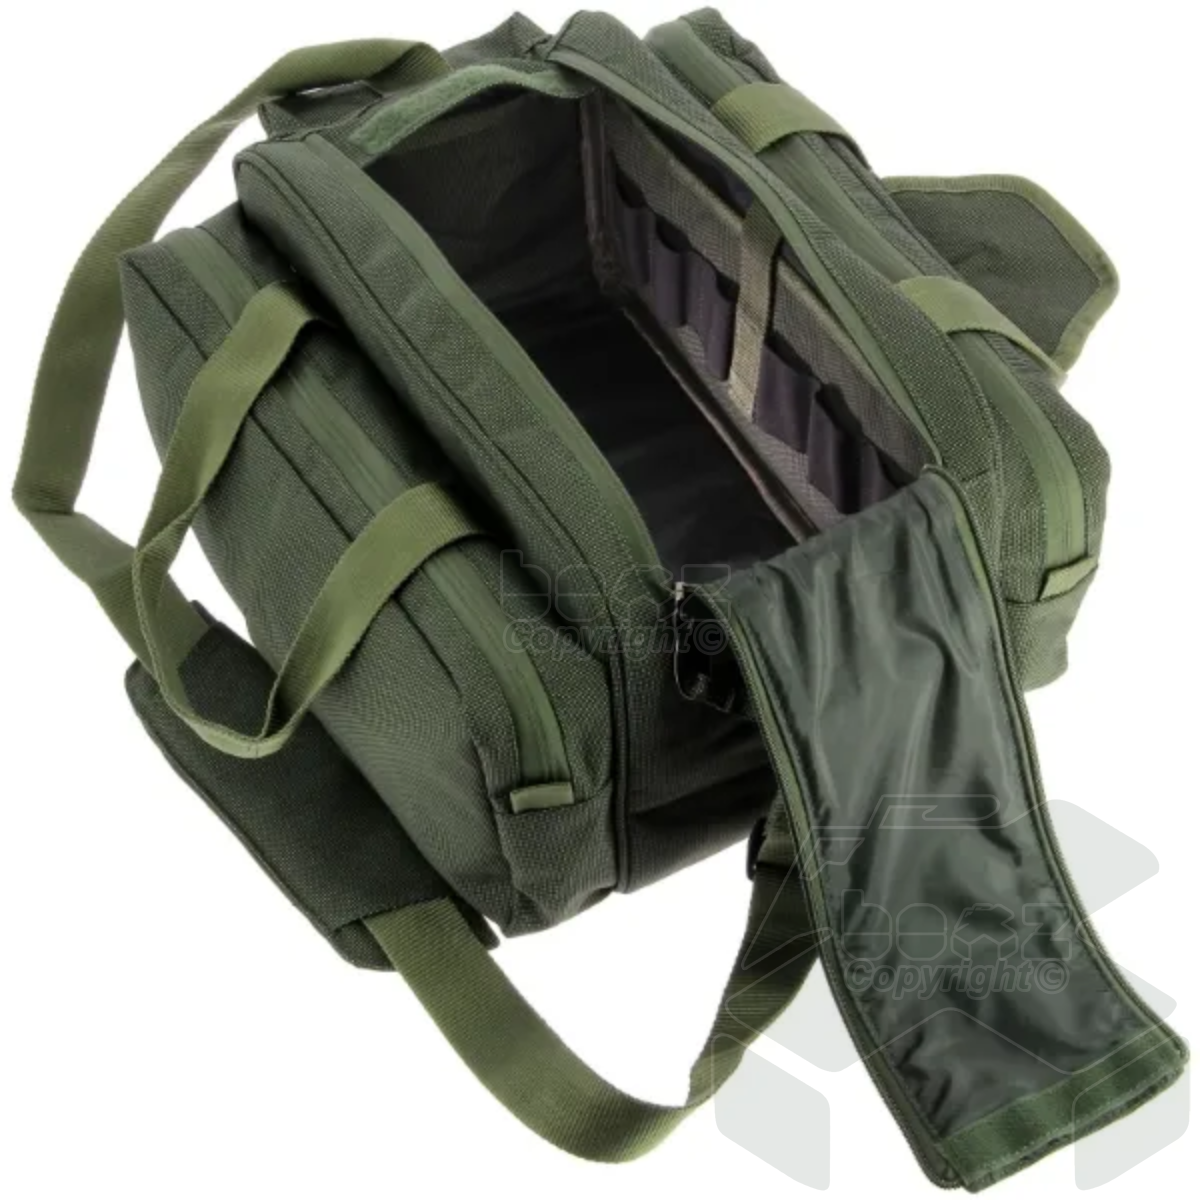 Anglo Arms Cartridge Bag - Holds up to 250 Cartridges and Accessories